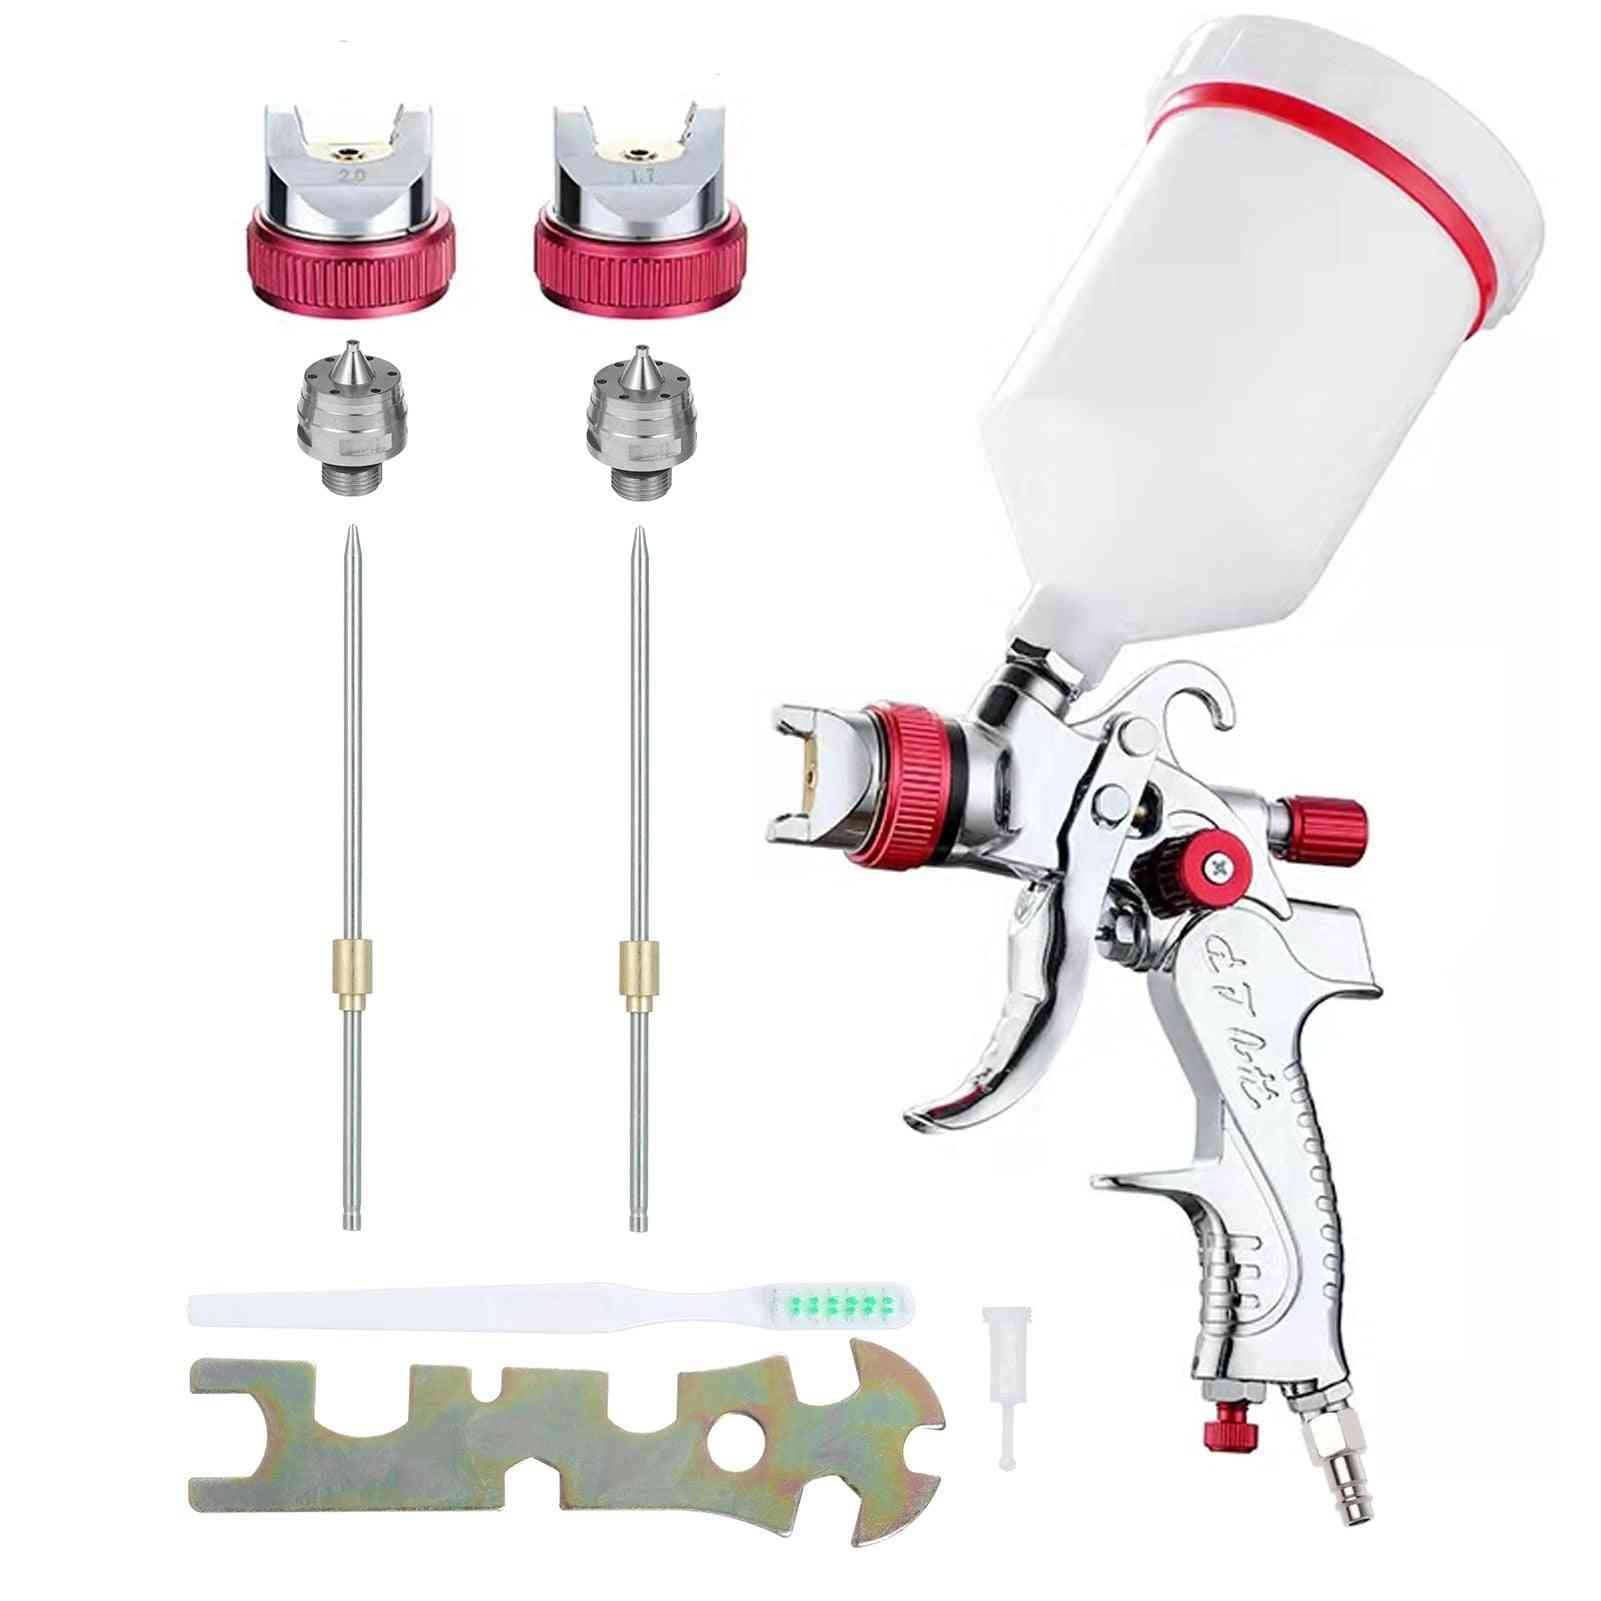 Airbrush Nozzle Needle Spray Gun For Painting Car Furniture Wall